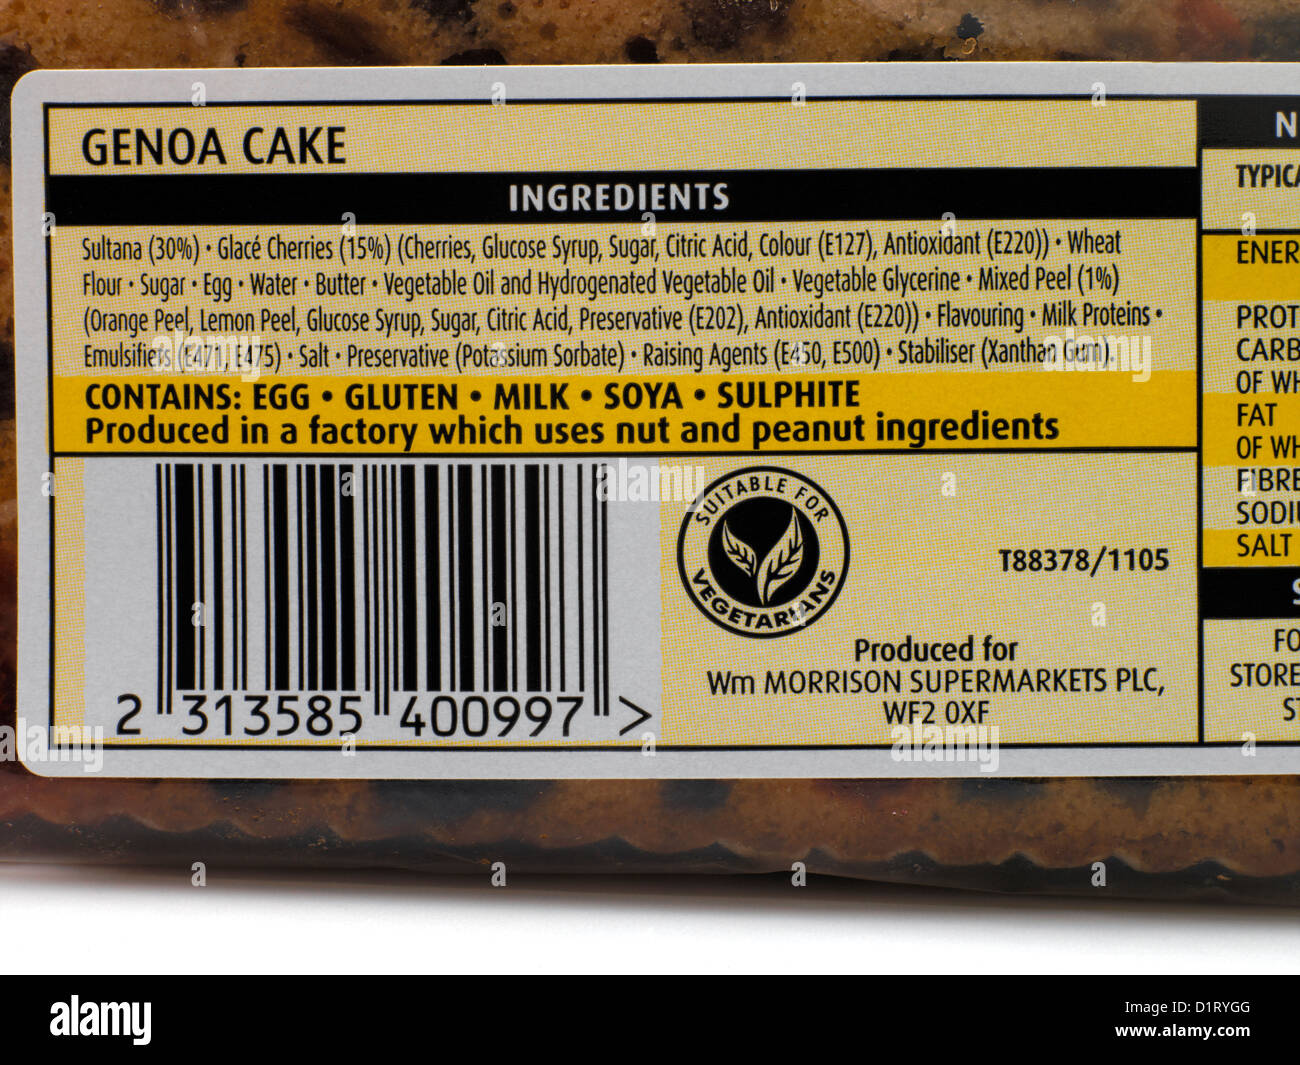 Nut Warning Label Produced in a Factory Which Uses Nut and Peanut Ingredients on Genoa Cake Stock Photo